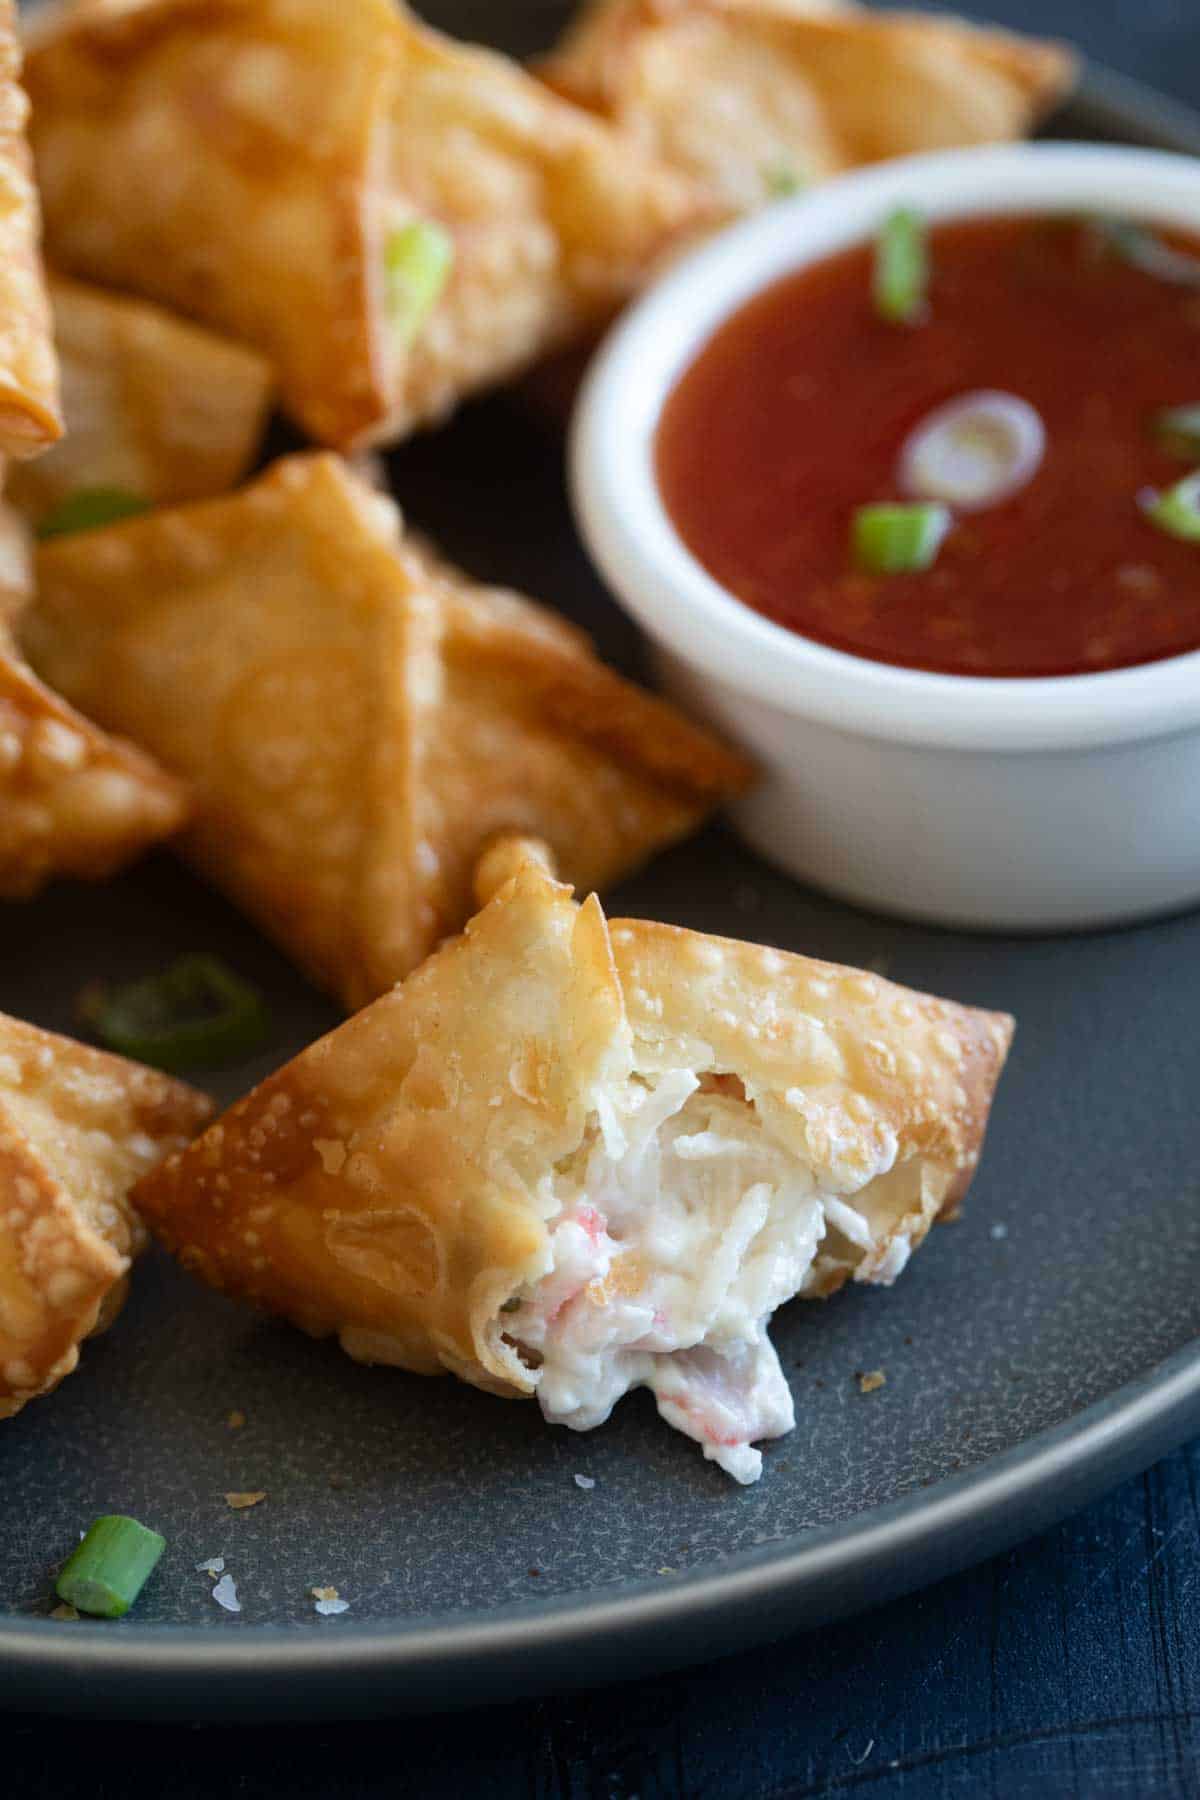 Crab Rangoon with a bite taken from one.